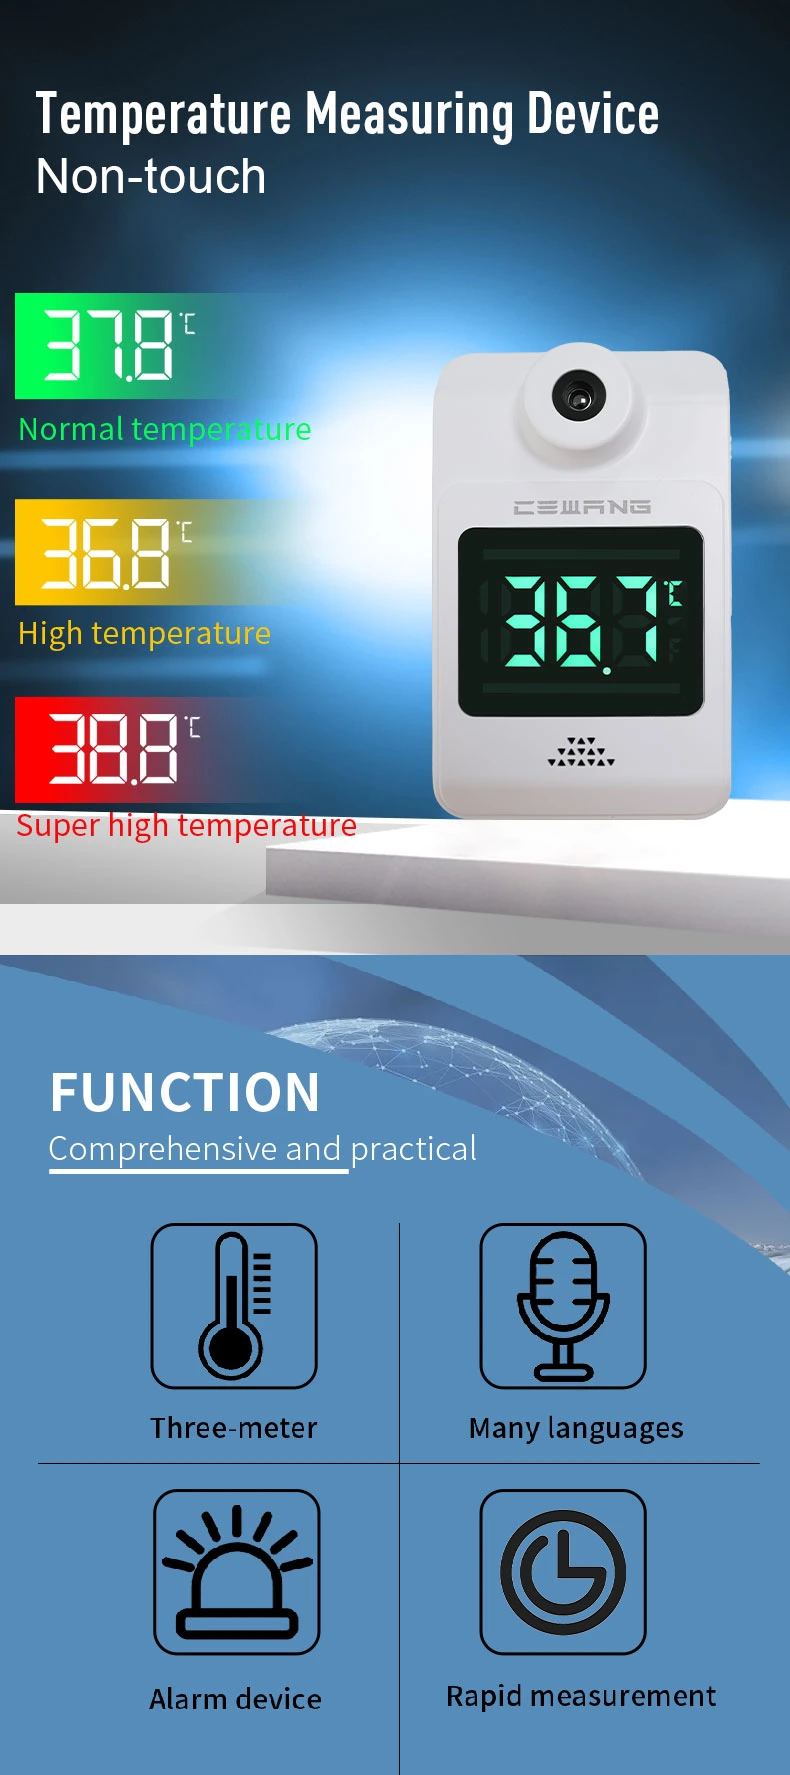 Long Measuring Distance Temperature Scanner Device for Body Temperature Check